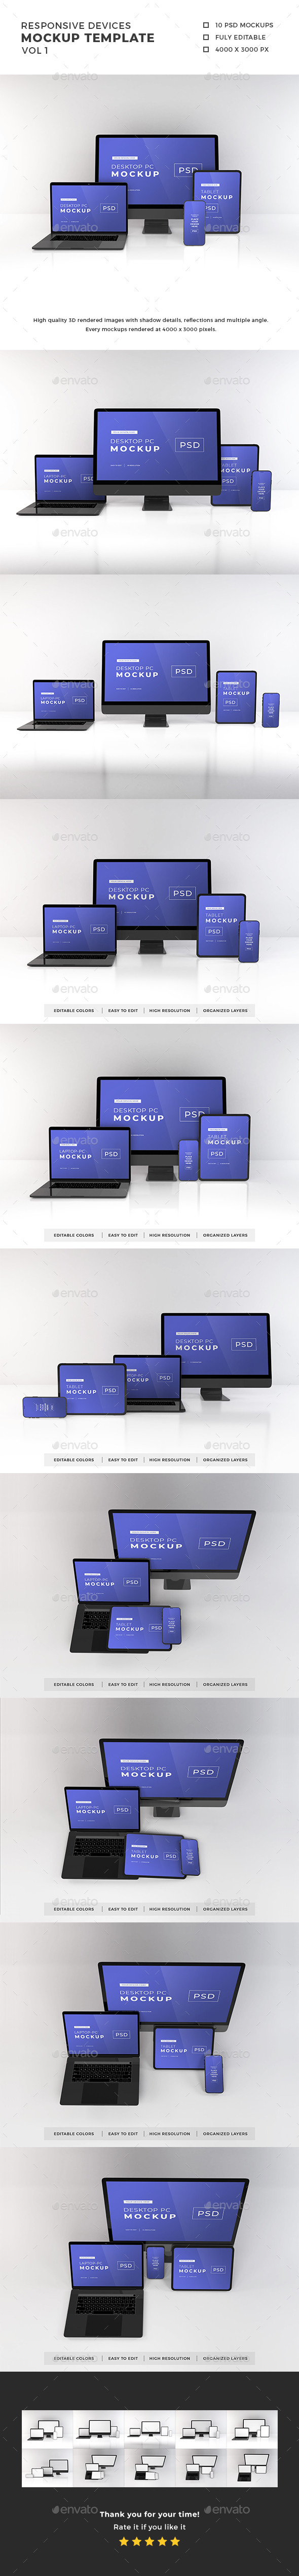 Responsive Devices Mockup Template Vol 1